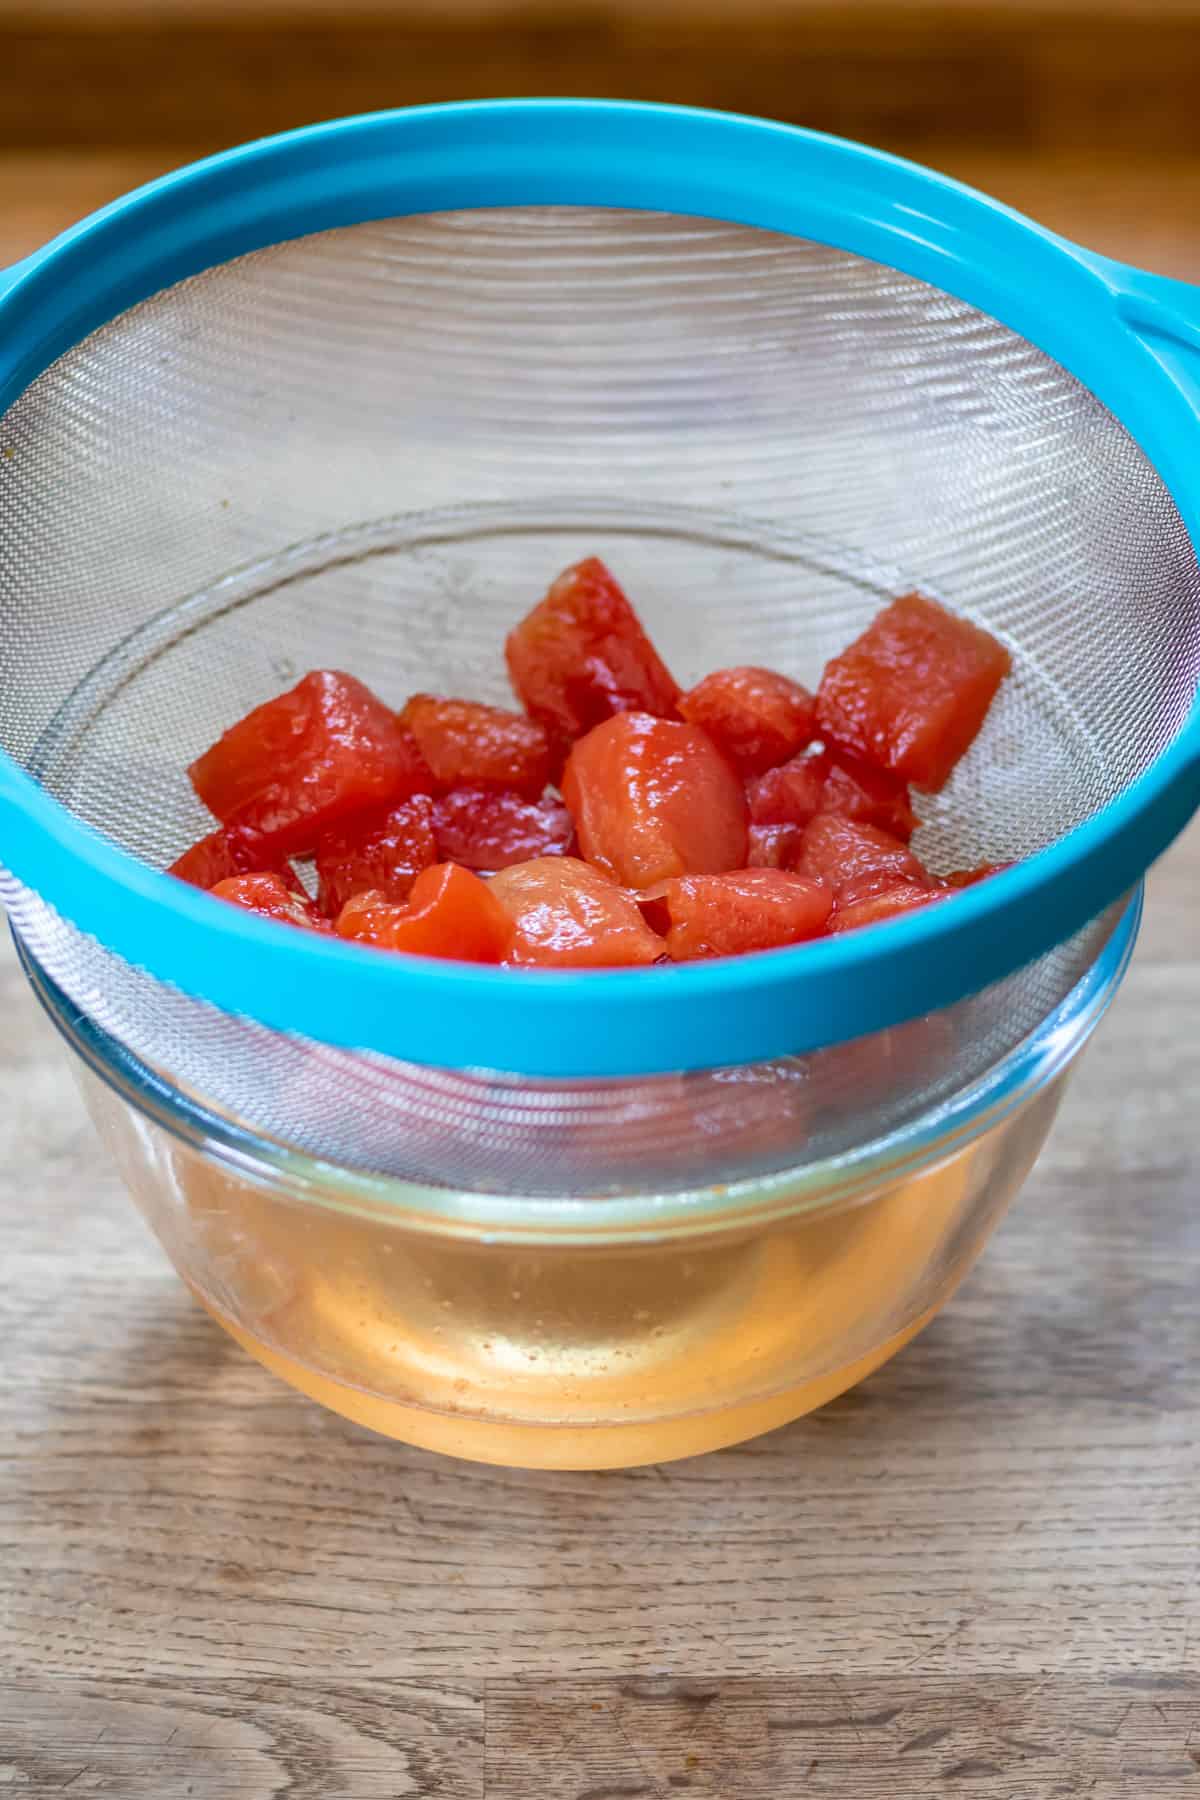 Straining the watermelon out of the simple syrup through a seive.